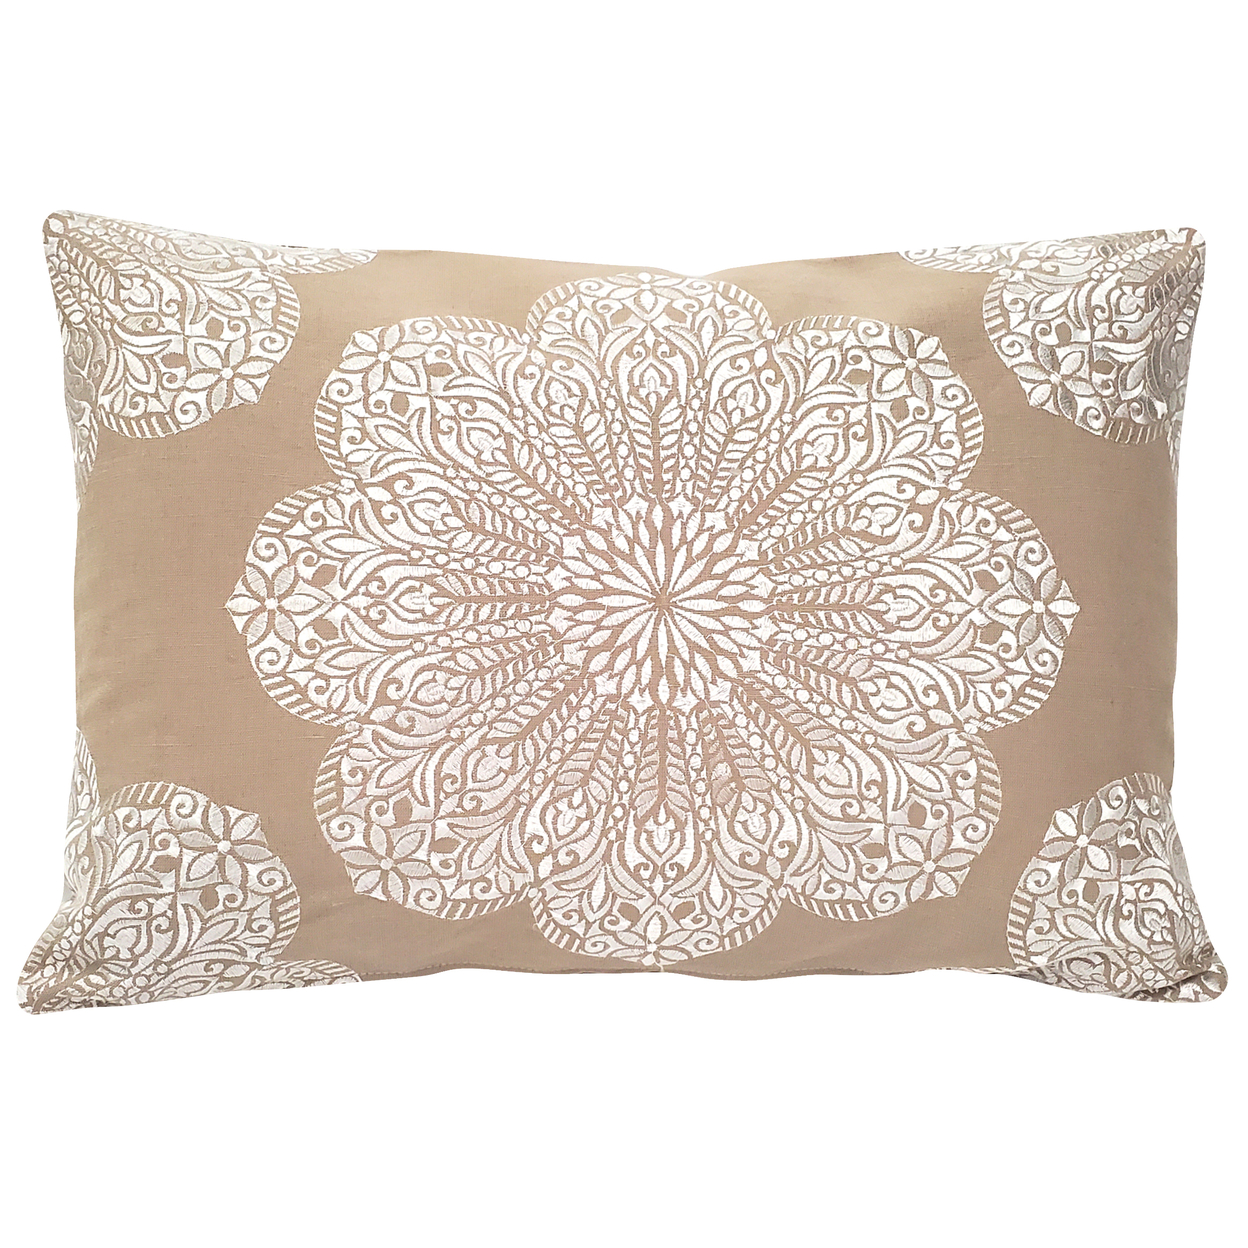 Mancini Coffee And Cream Medallion Embroidered Throw Pillow 16x24, With Polyfill Insert